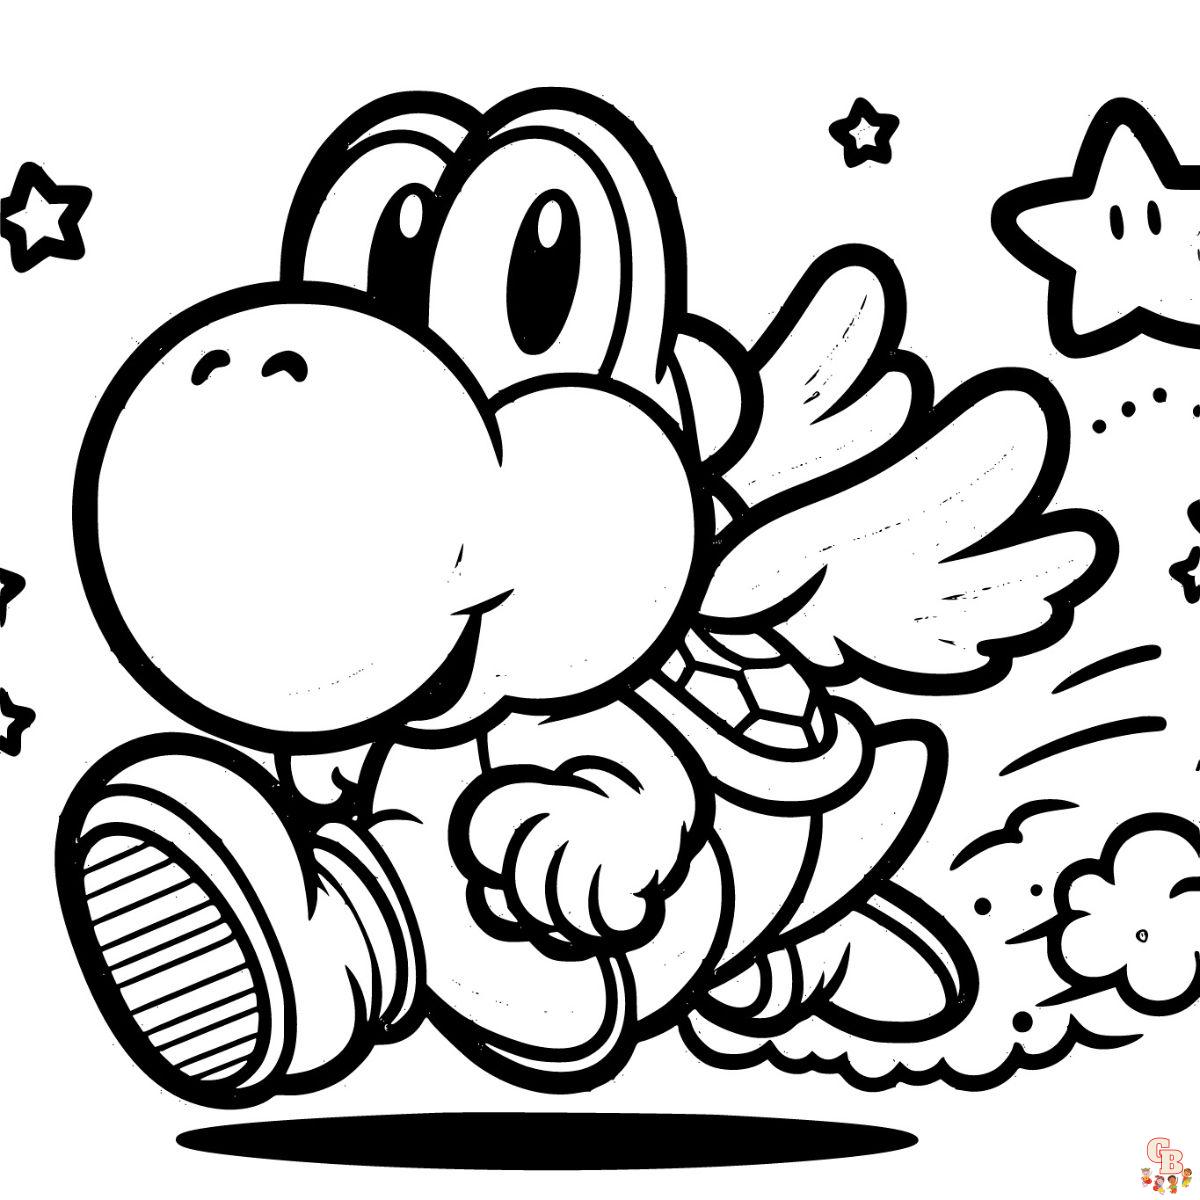 baby yoshi coloring pages